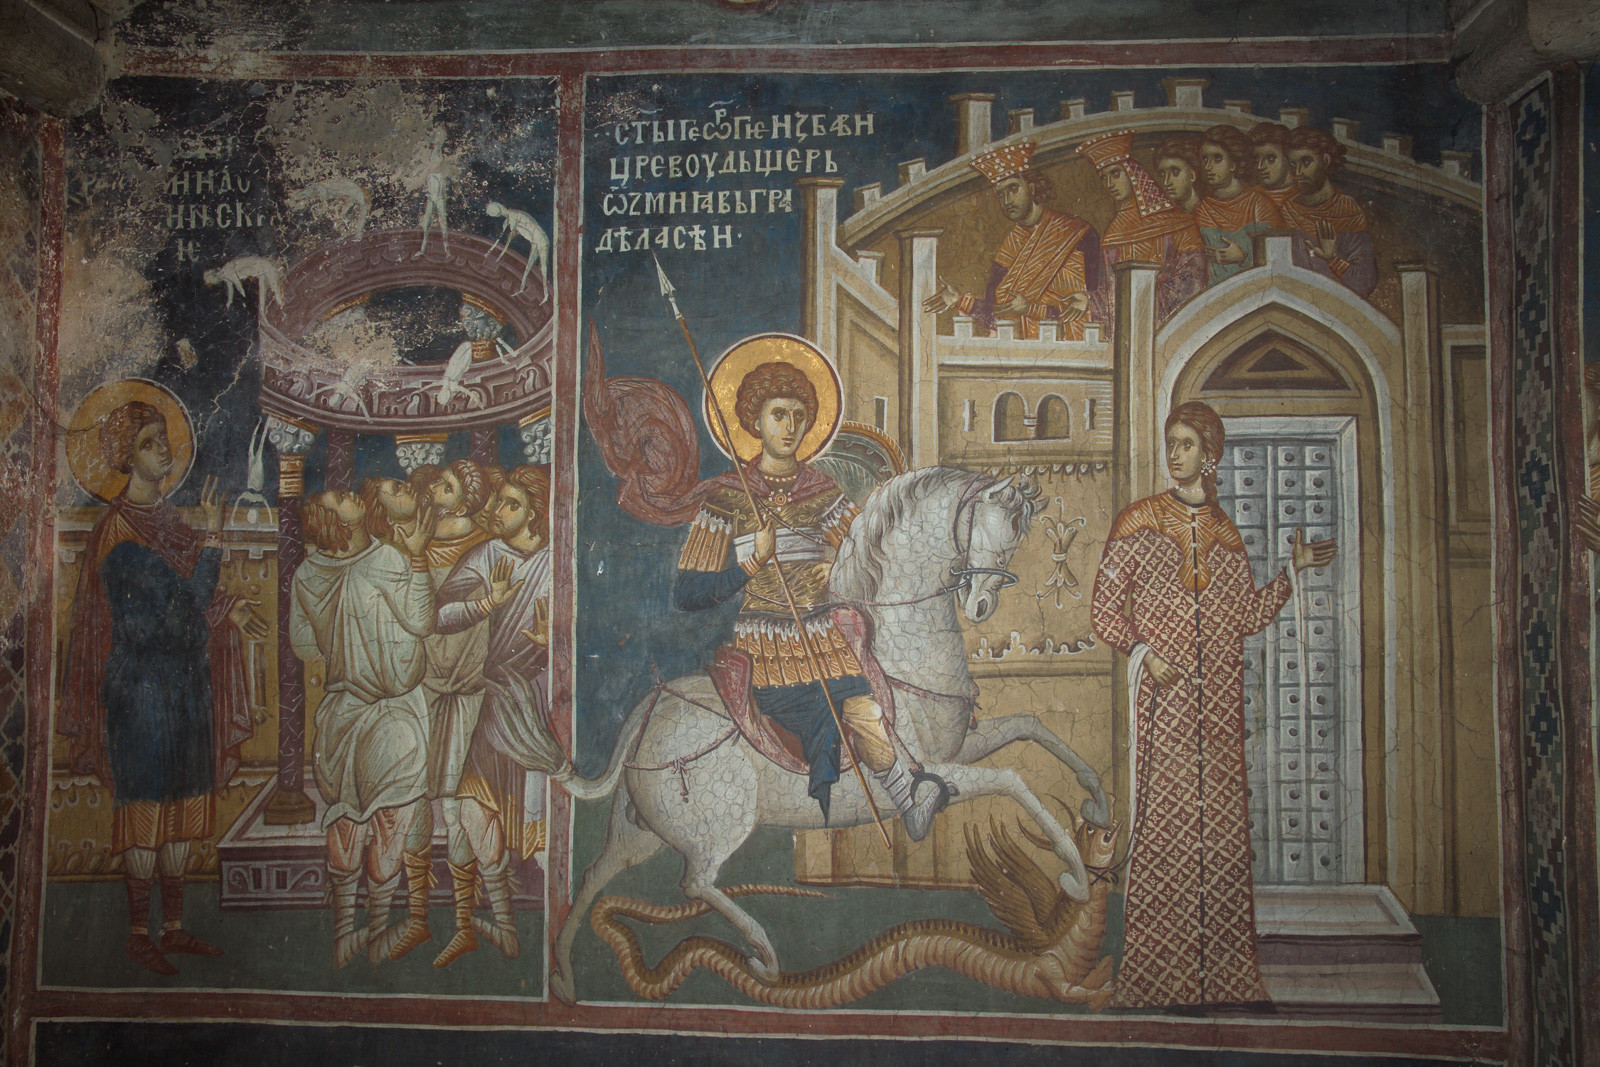 56,57 St. George Destroying Idols by His Prayer and 57 St. George Rescues the Princess